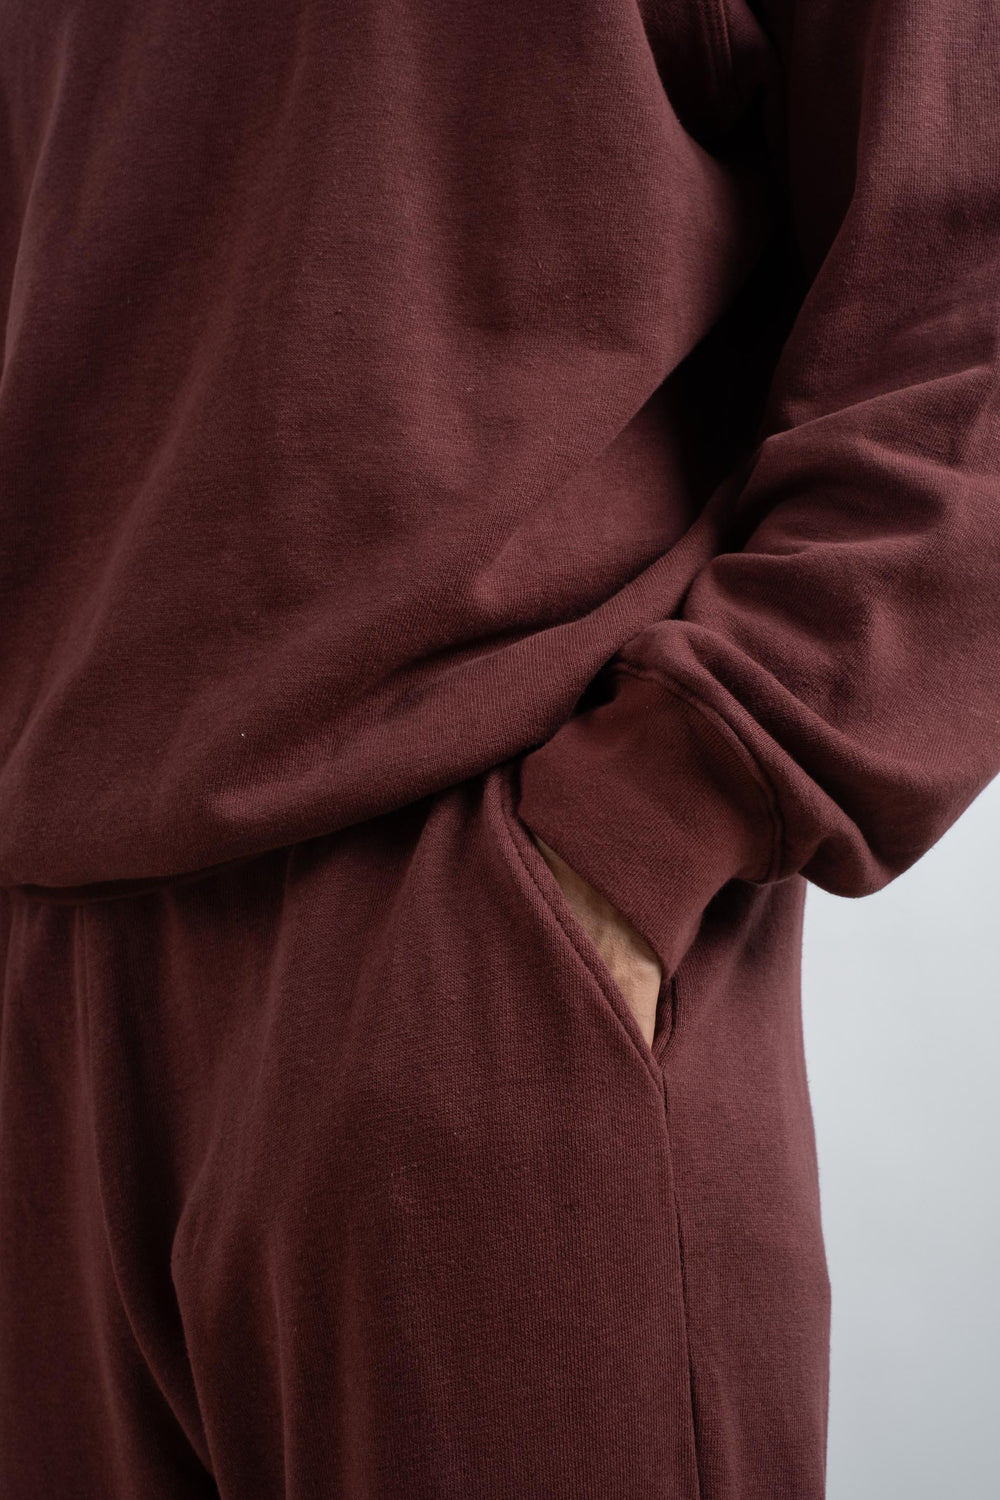 The New Sweatpant In Burgundy